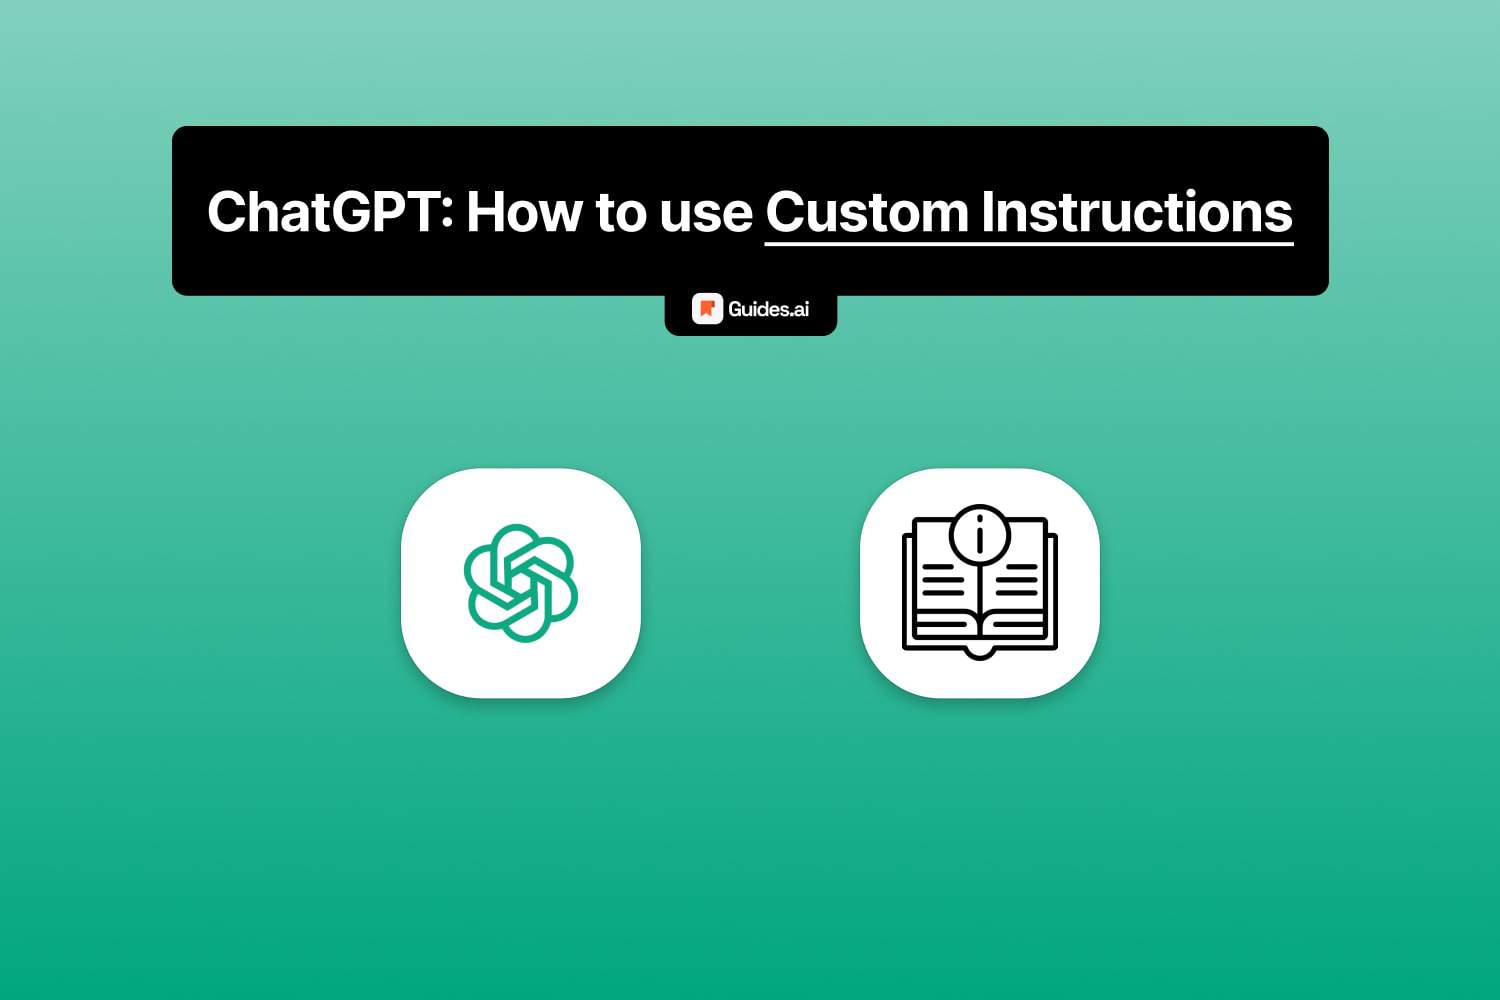 How to enable and use ChatGPT custom instructions